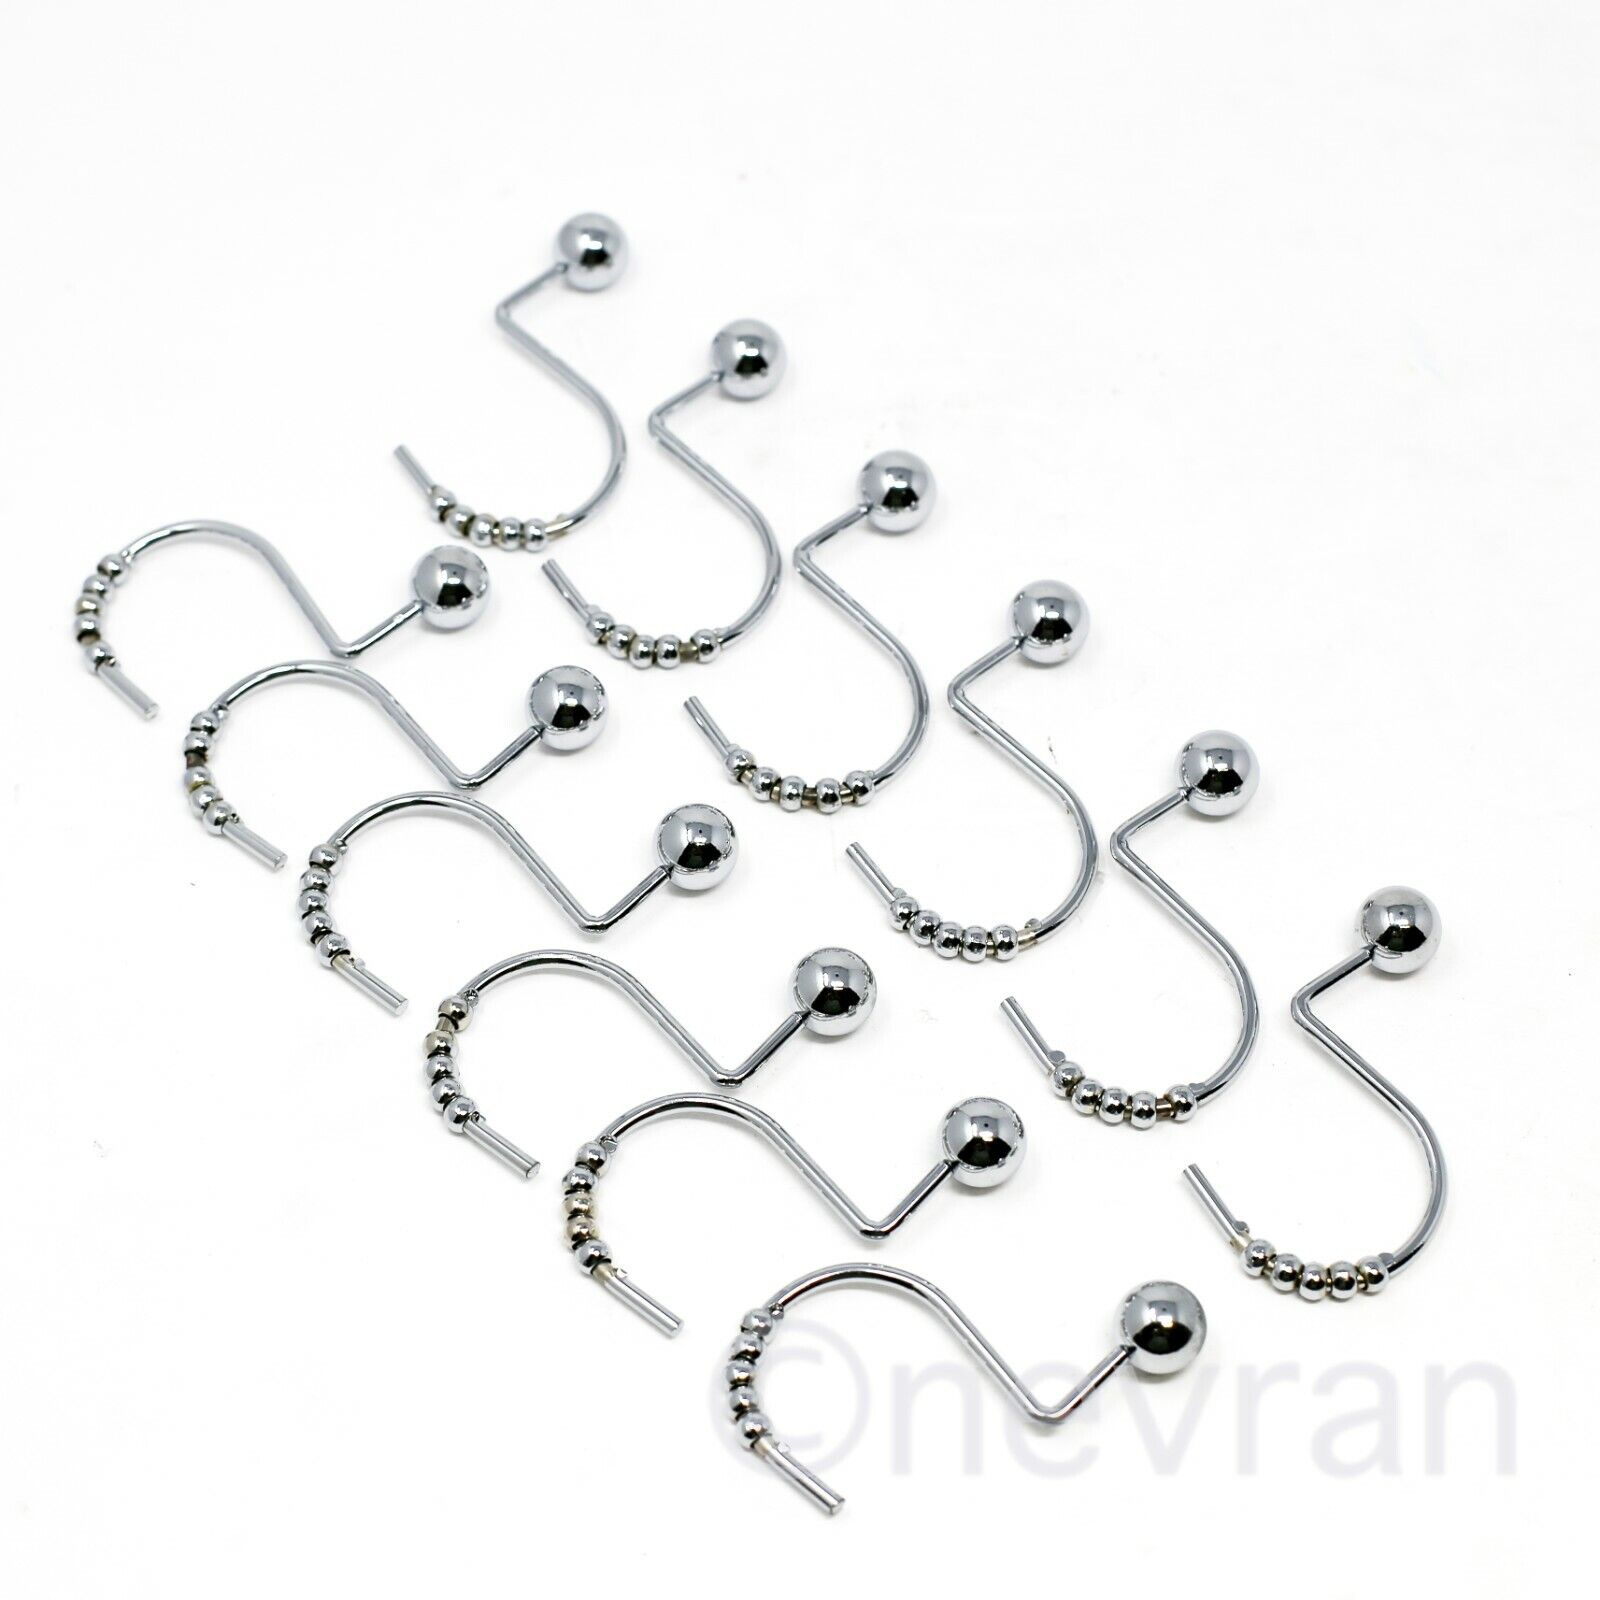 Shower Curtain Hooks Rust Proof Ring Metal Chrome Single Roller Glide 12 PCS Nevran Shower Hooks with Ball End in Chrome - фотография #9